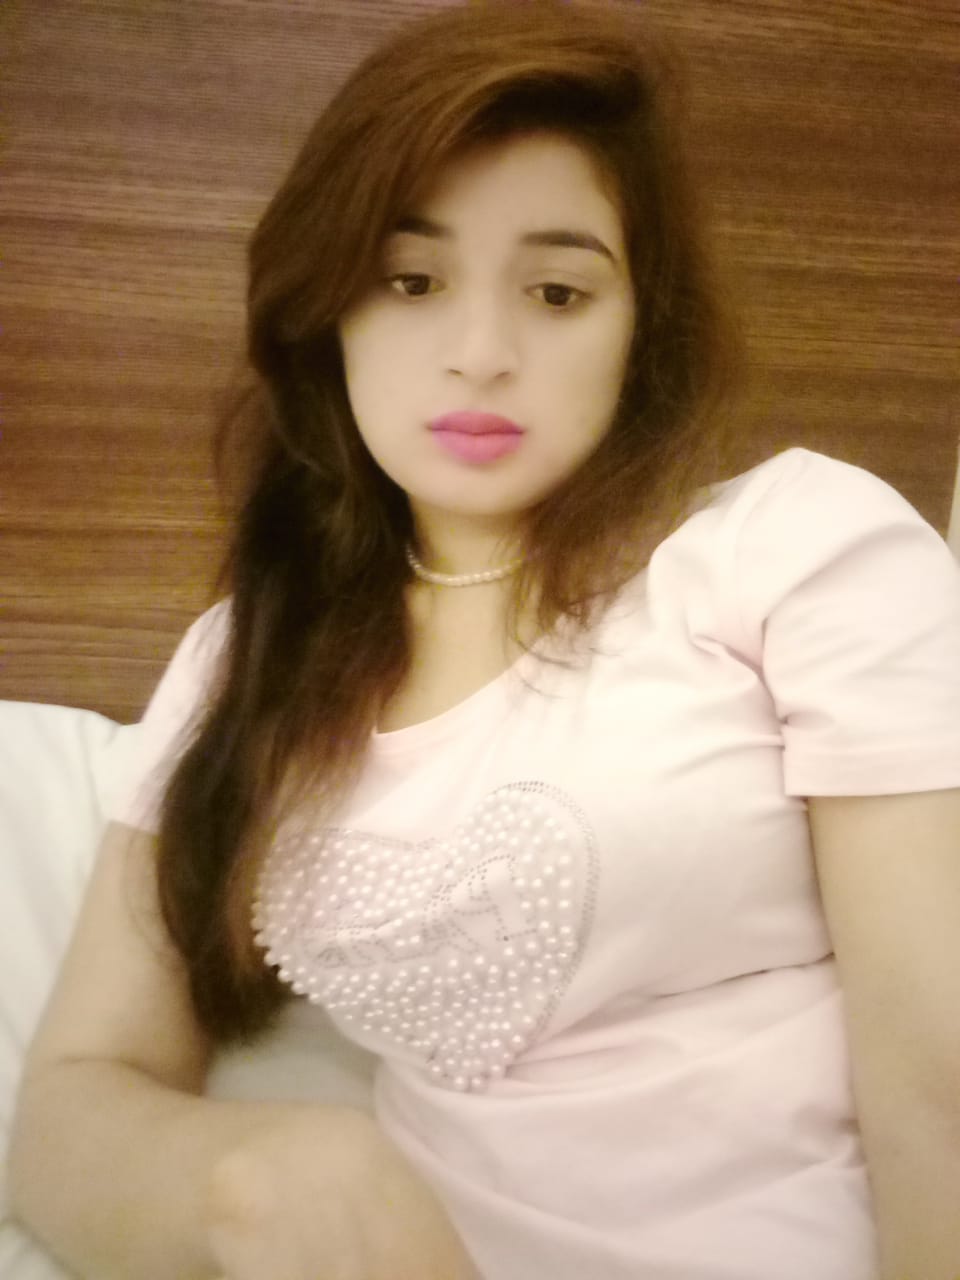 Indian Escorts in Sheikh Zayed Road	+971508049027